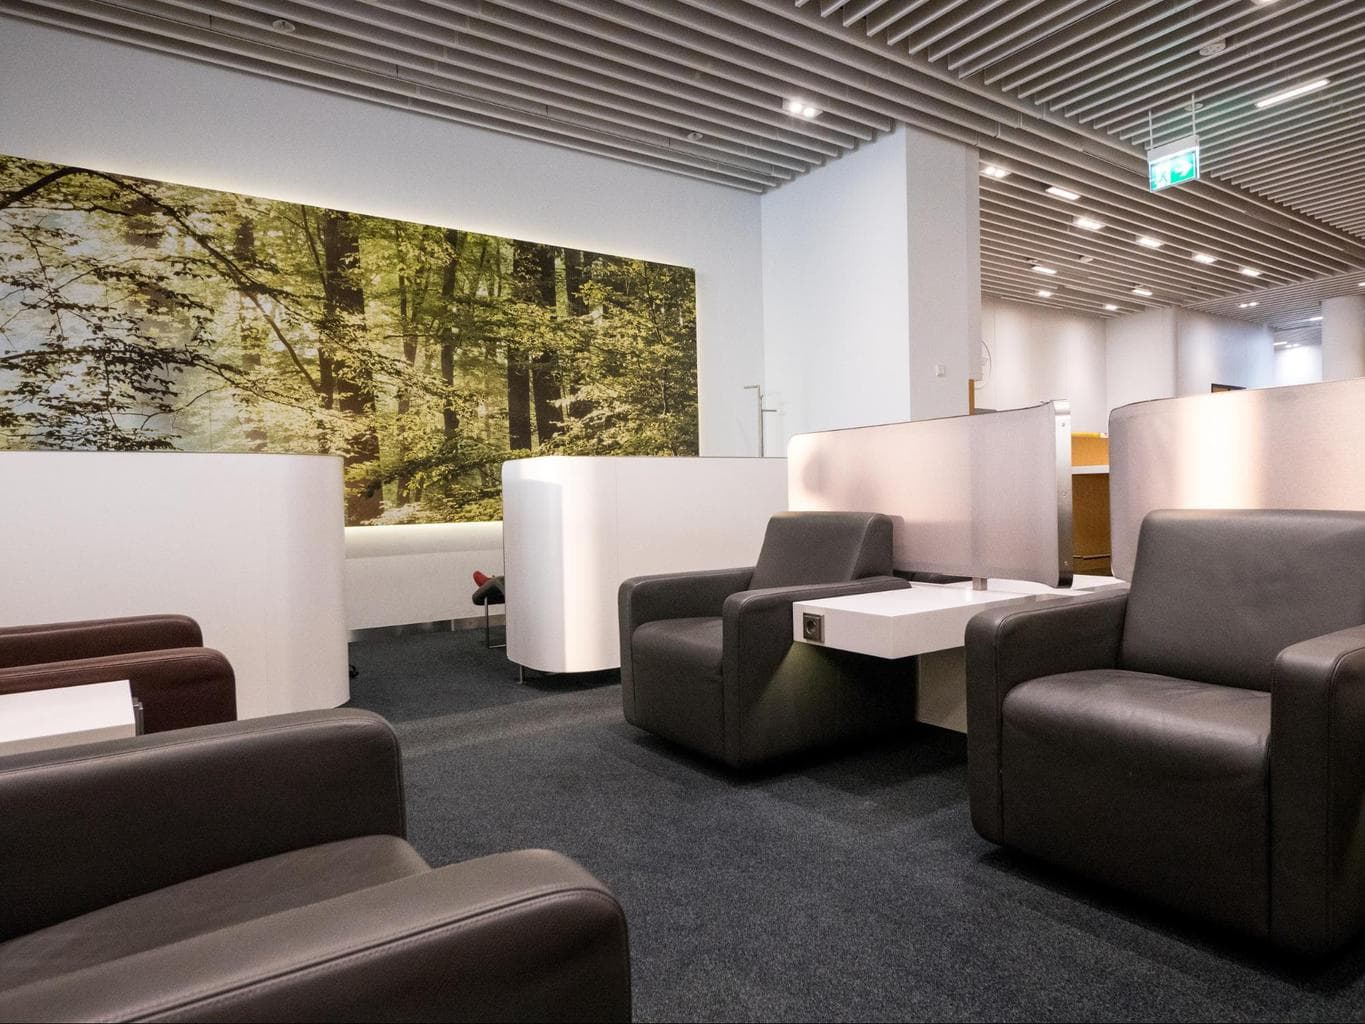 Sofas and relaxation area in Lufthansa Business Class Lounge at Munich Airport